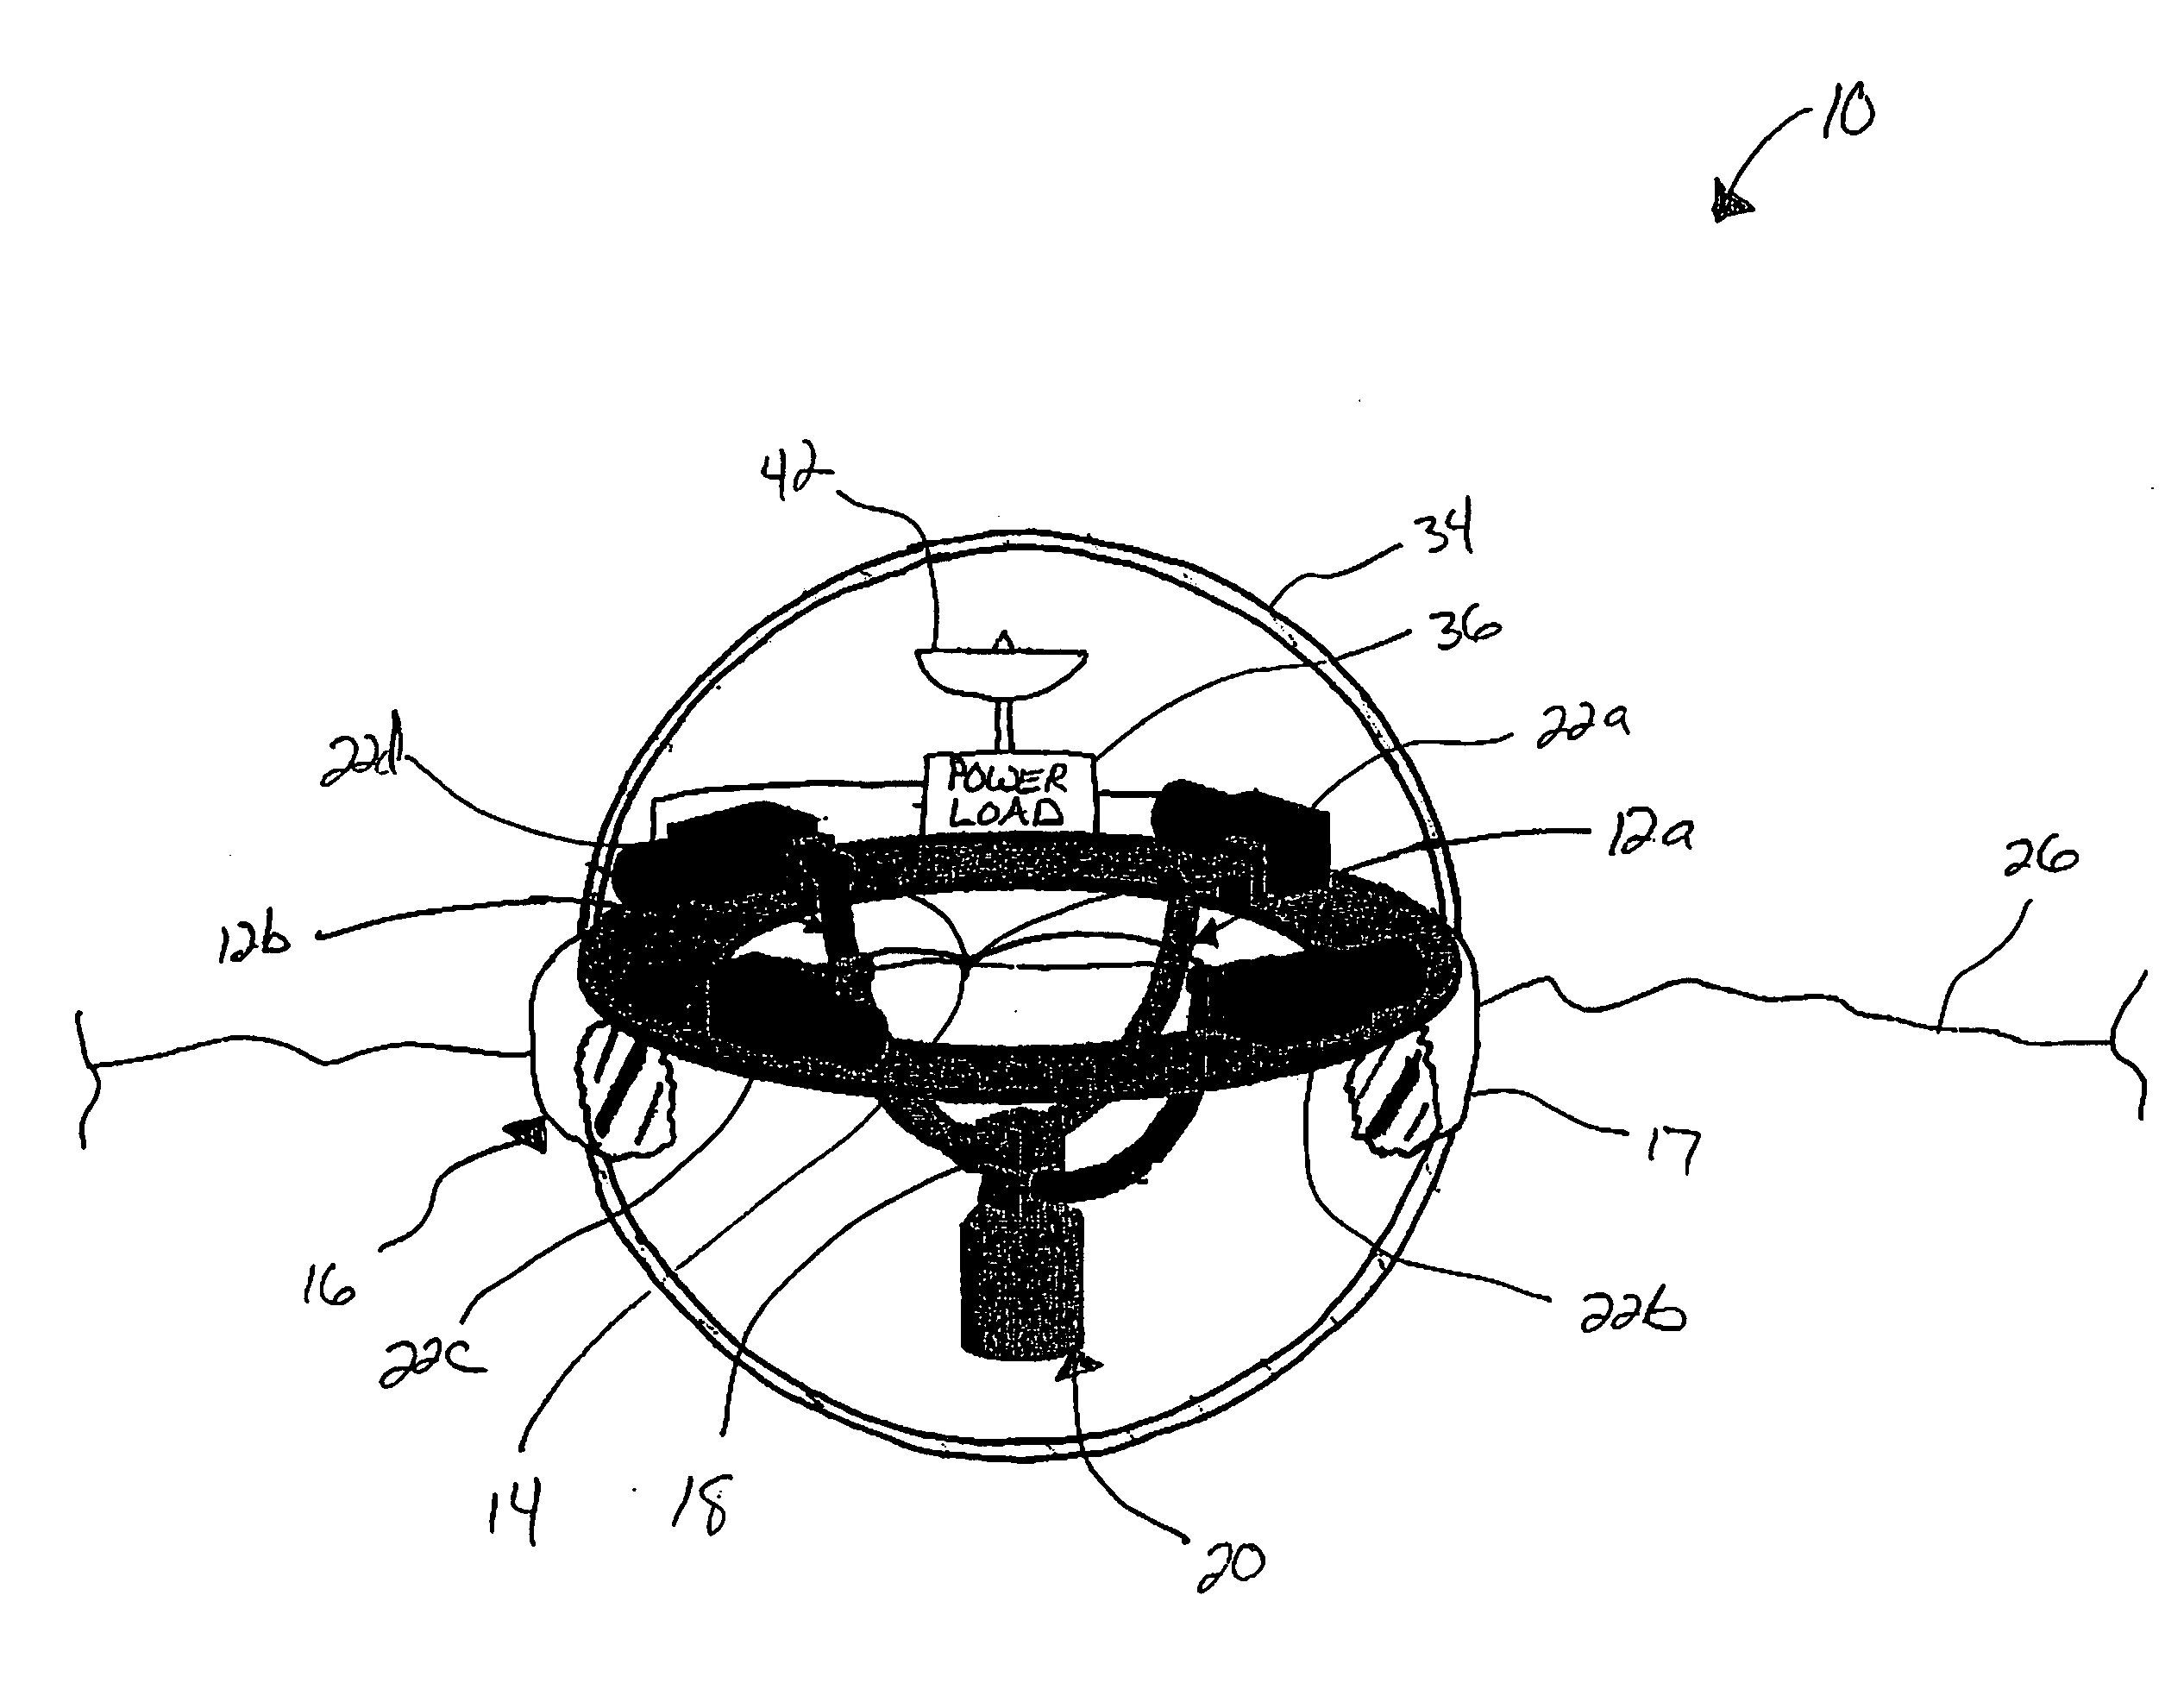 Apparatus for electrical signal generation based upon movement and associated methods